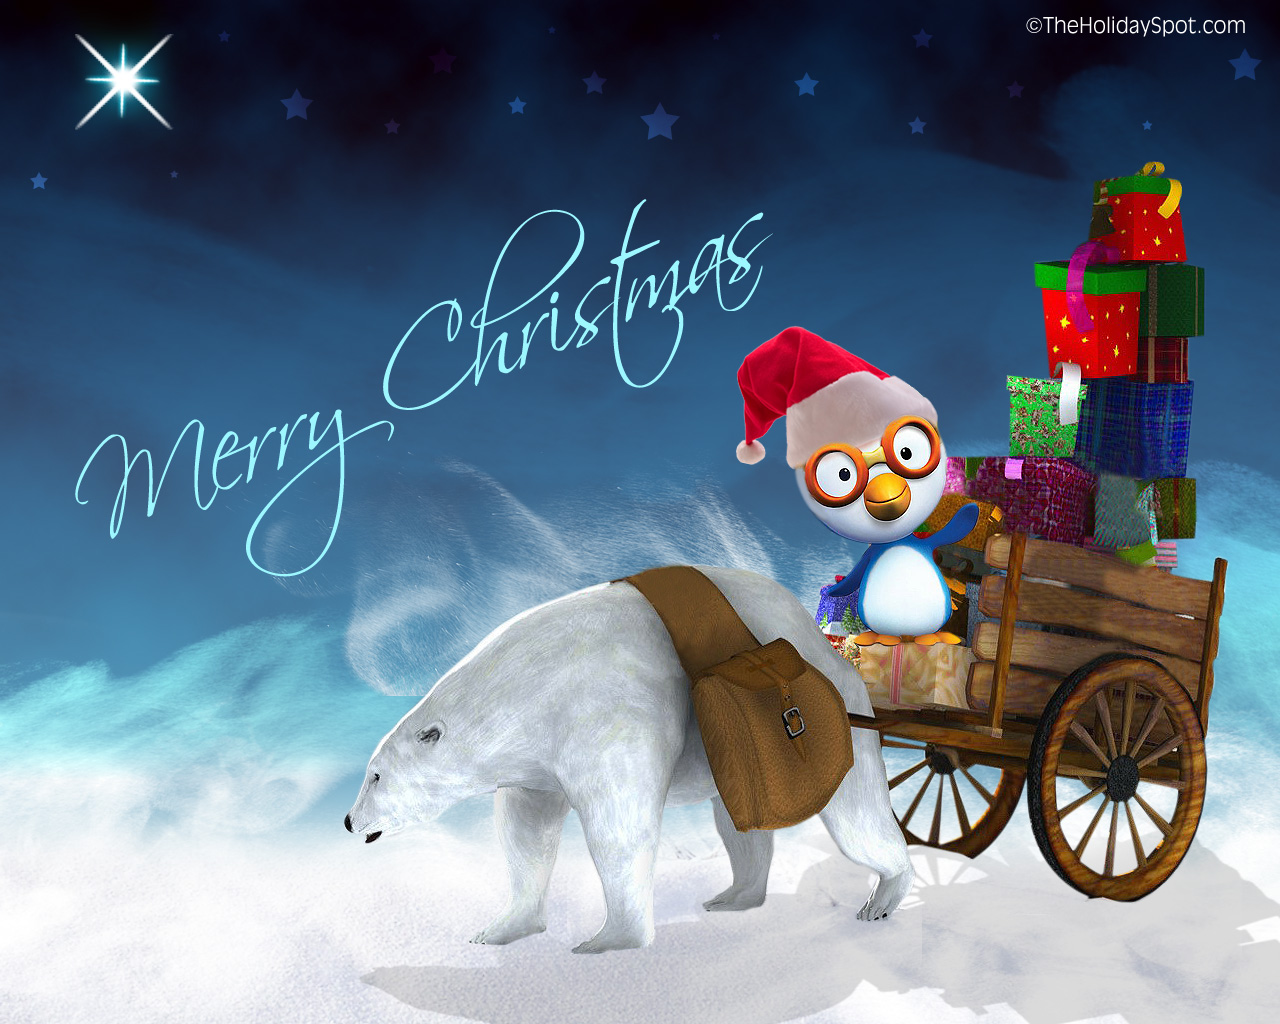 http://www.theholidayspot.com/christmas/wallpapers/new_images/merry-christmas.jpg